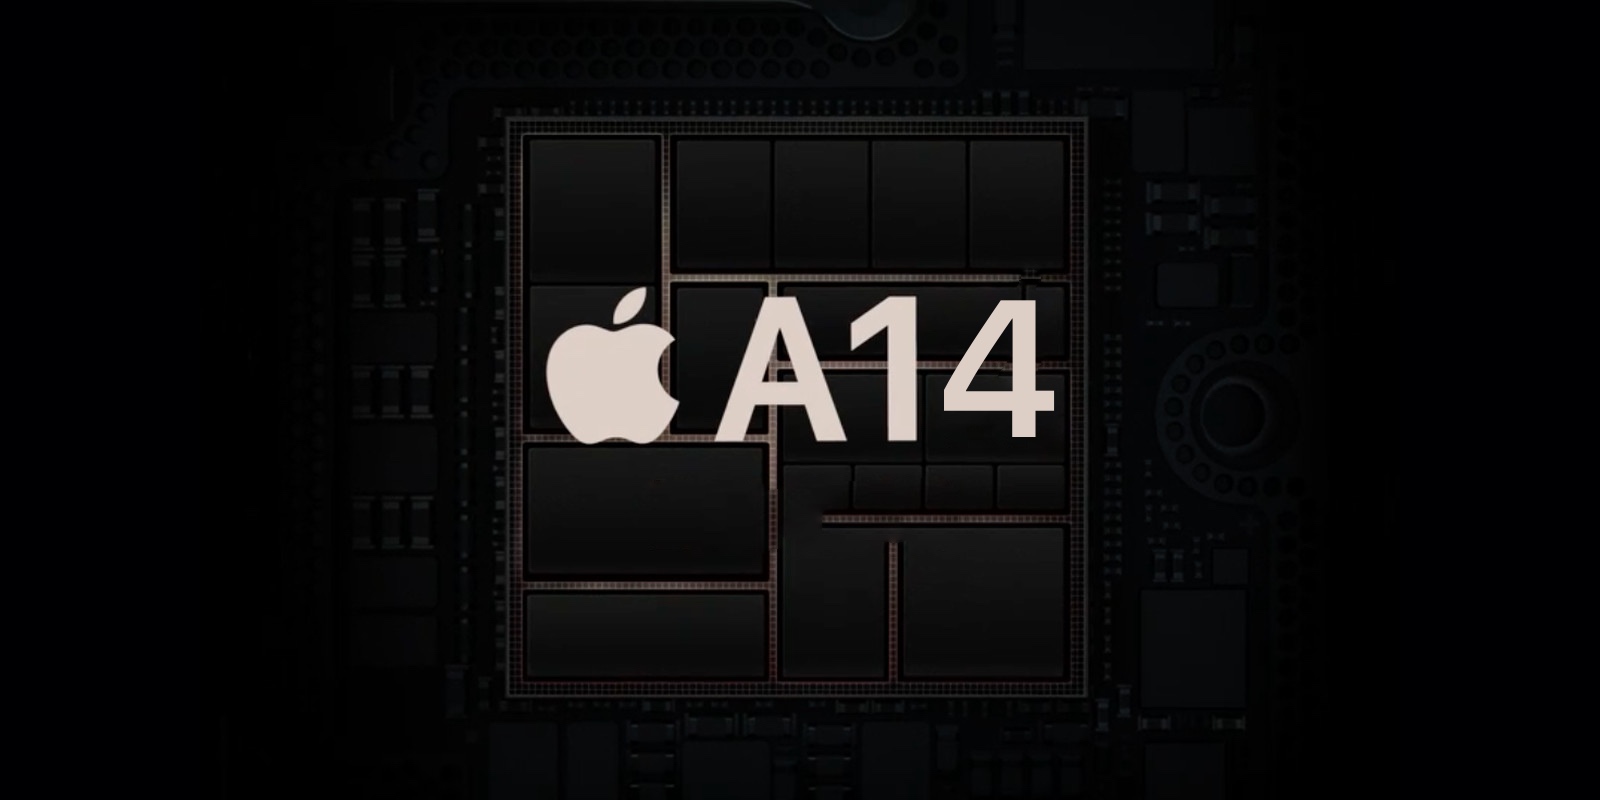 TSMC will reportedly start production of A14 chip for this year's iPhones in Q2, new 5 nanometer process - 9to5Mac